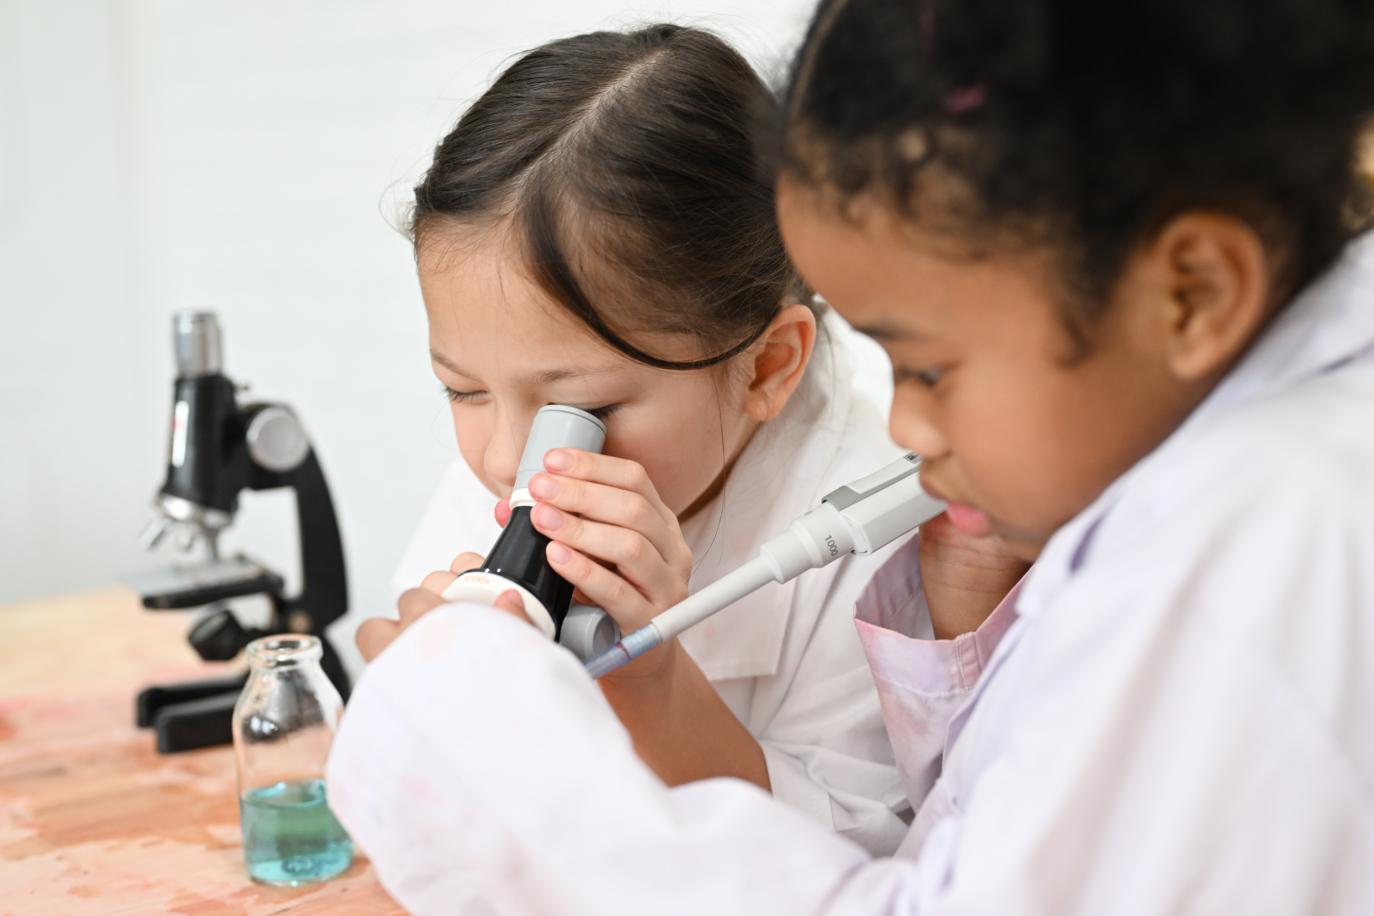 Two young schoolgirls wearing labcoats looking through a microscope in a school science lab